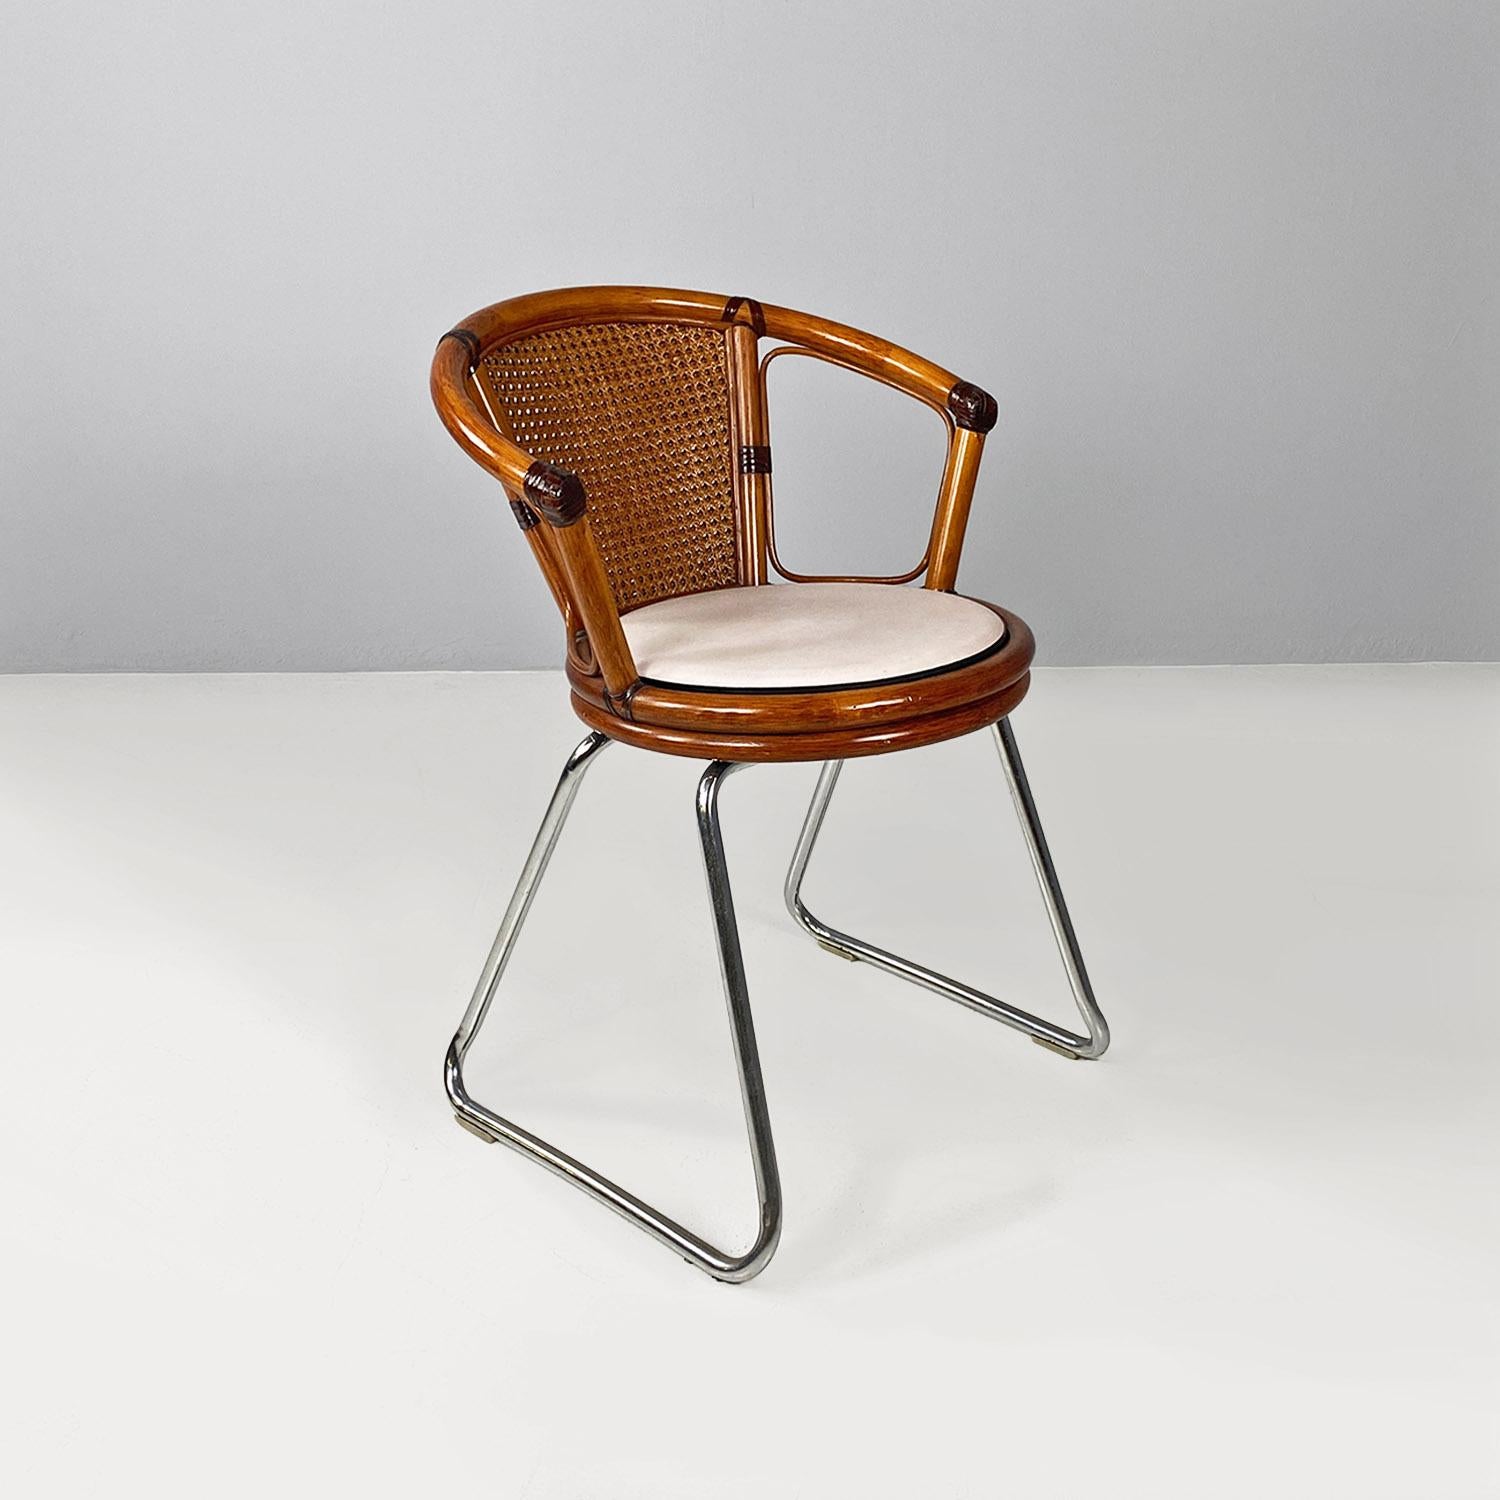 Cockpit chair, modern Italian, made of vienna straw wood and steel, ca. 1970.
Cockpit chair, with Vienna straw seat and back and curved wood to form the seat frame, finished with a round white cushion and armrests. The trapezoidal-shaped legs are